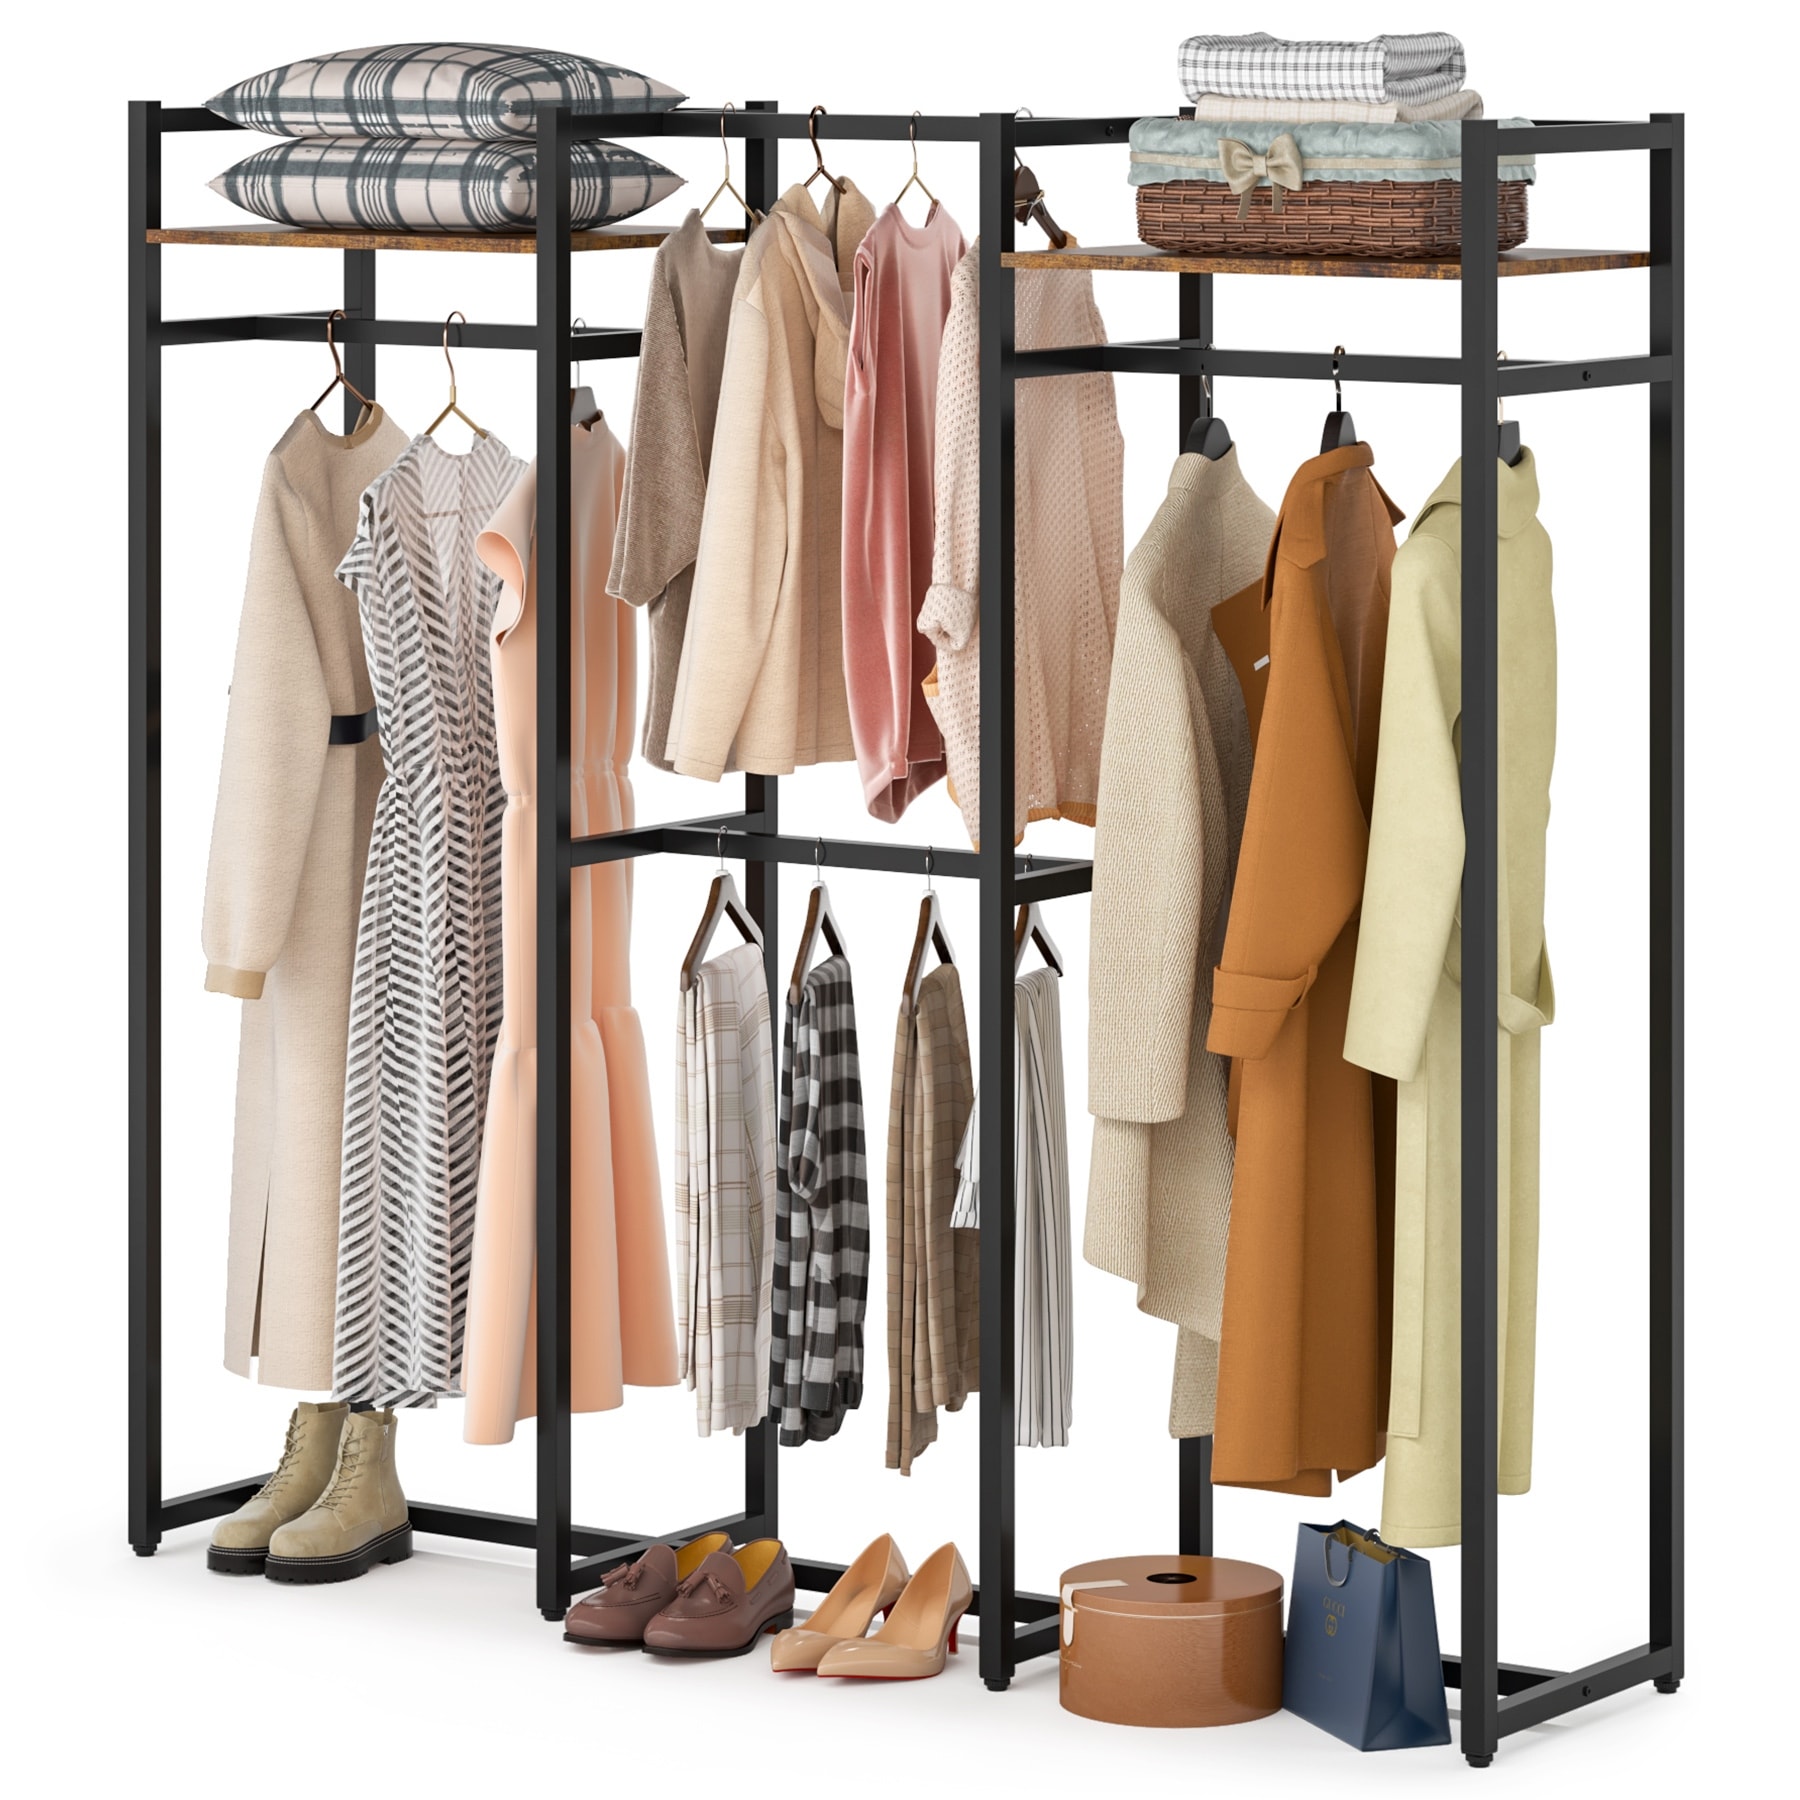 https://ak1.ostkcdn.com/images/products/is/images/direct/49d7fa78e870ffc72bd6f6569fc68eac82976525/Free-Standing-Closet-Organizer-with-Hanging-Rods%2C-Garment-Rack-Heavy-Duty-Clothes-Rack-with-Storage-Shelves%2C-Max-Load-500LBS.jpg